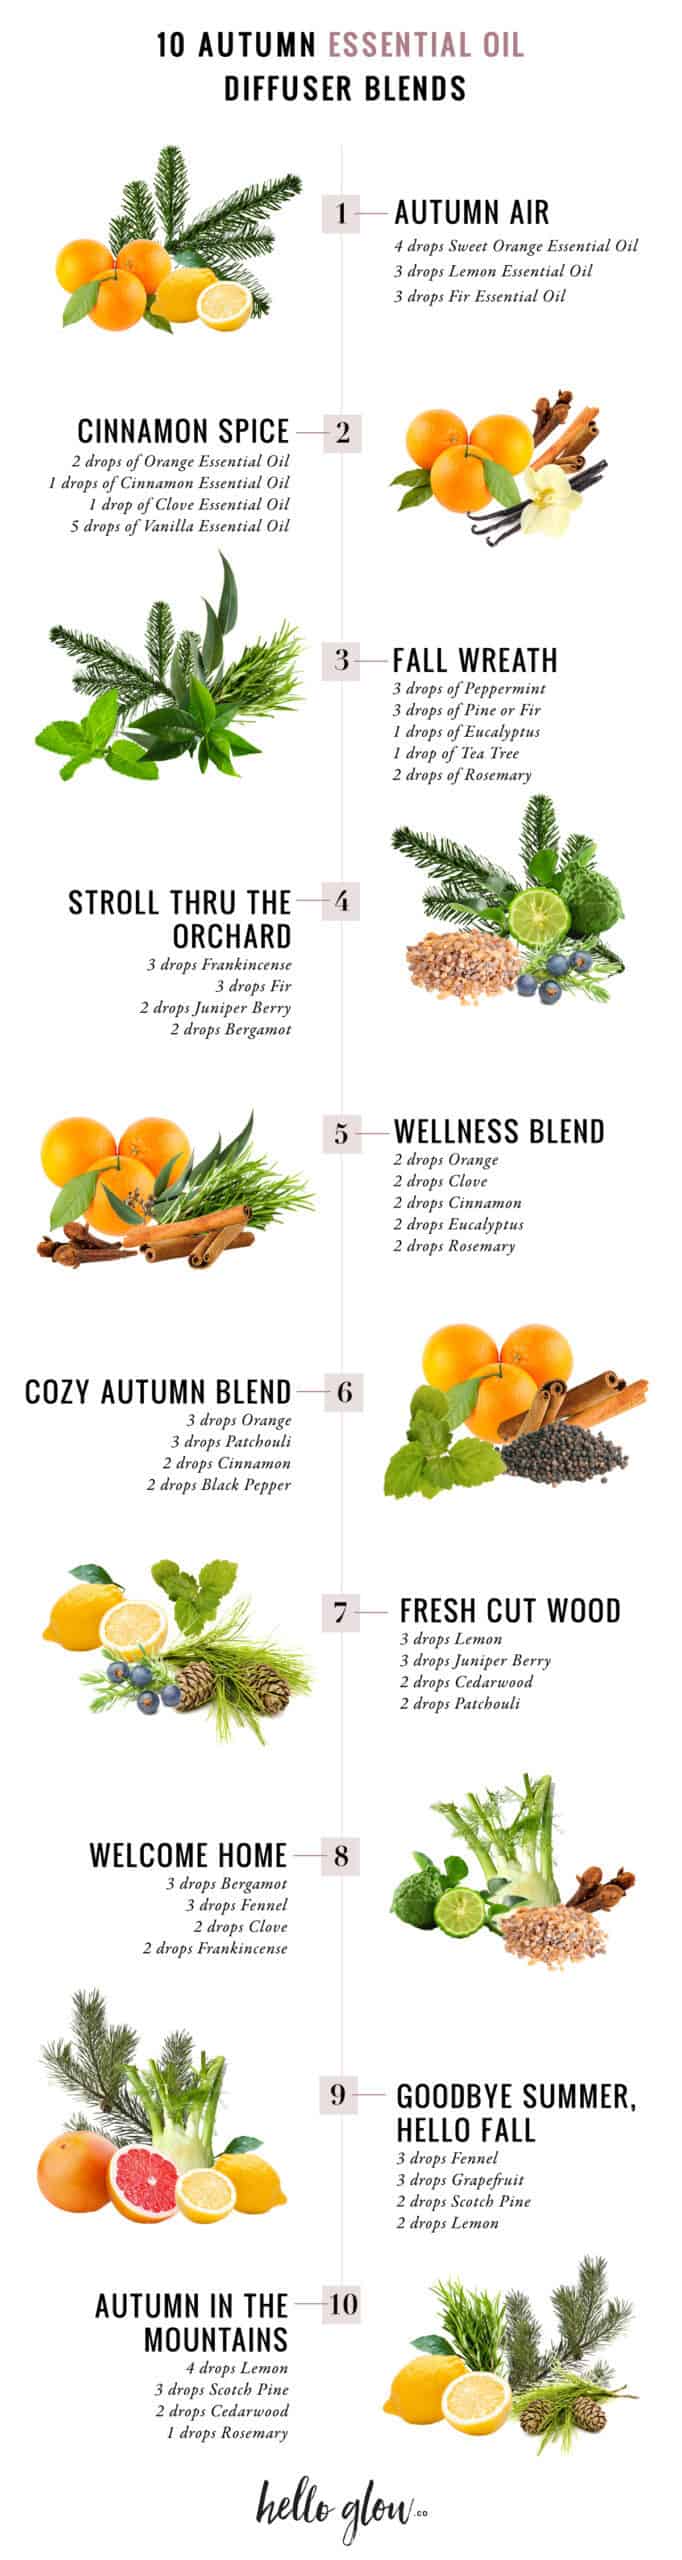 10 Essential Oil Diffuser Blends for Fall